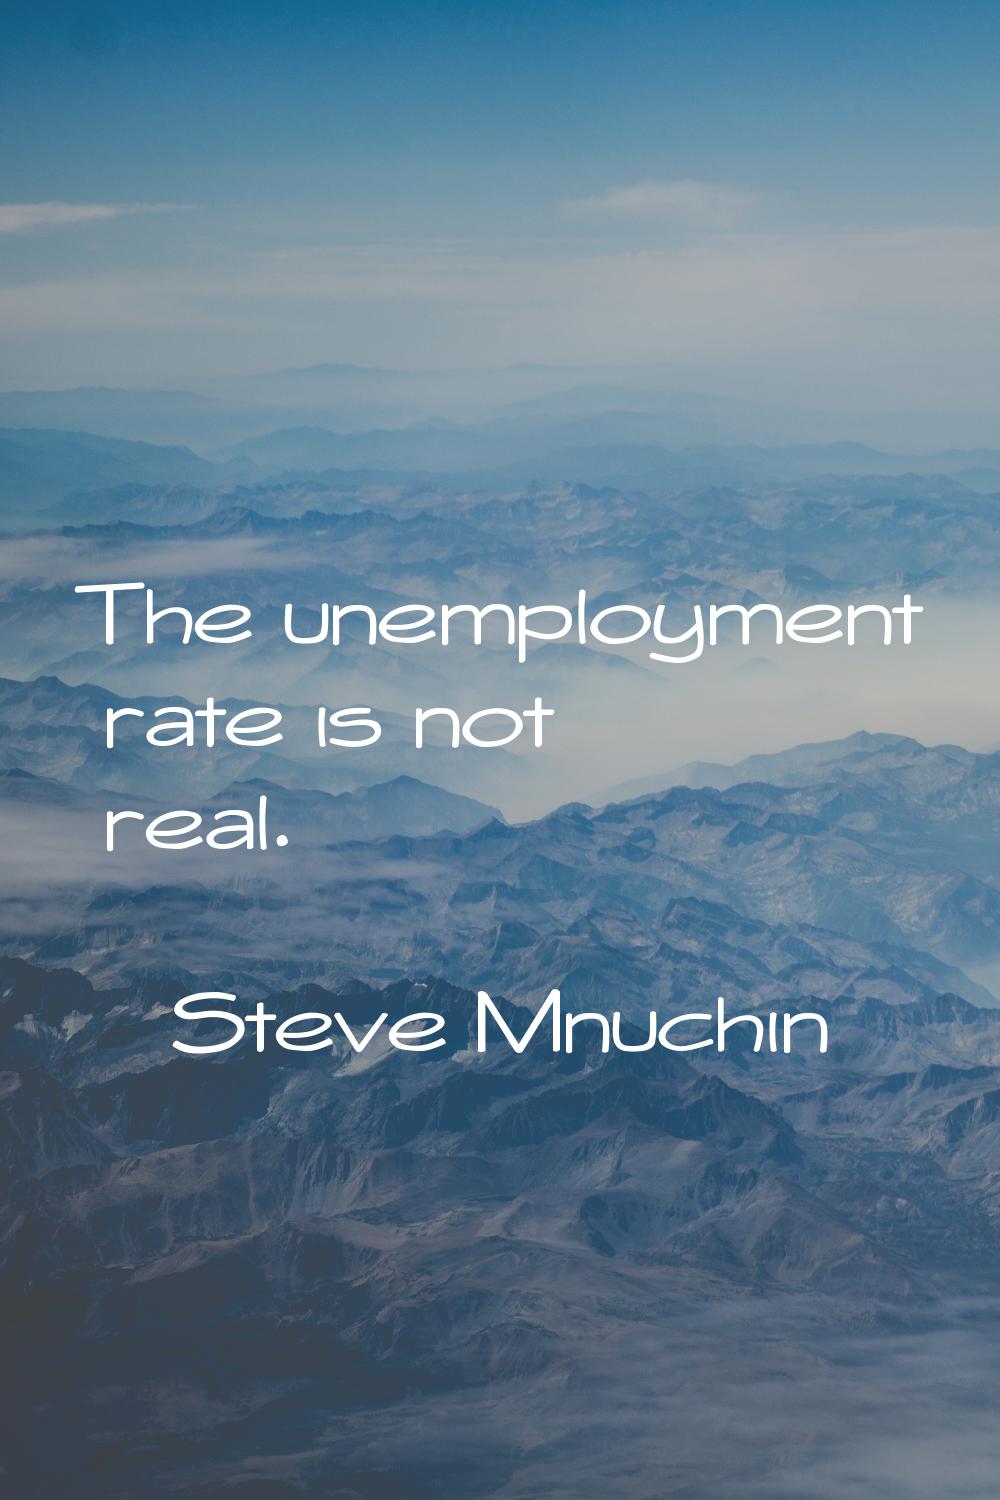 The unemployment rate is not real.